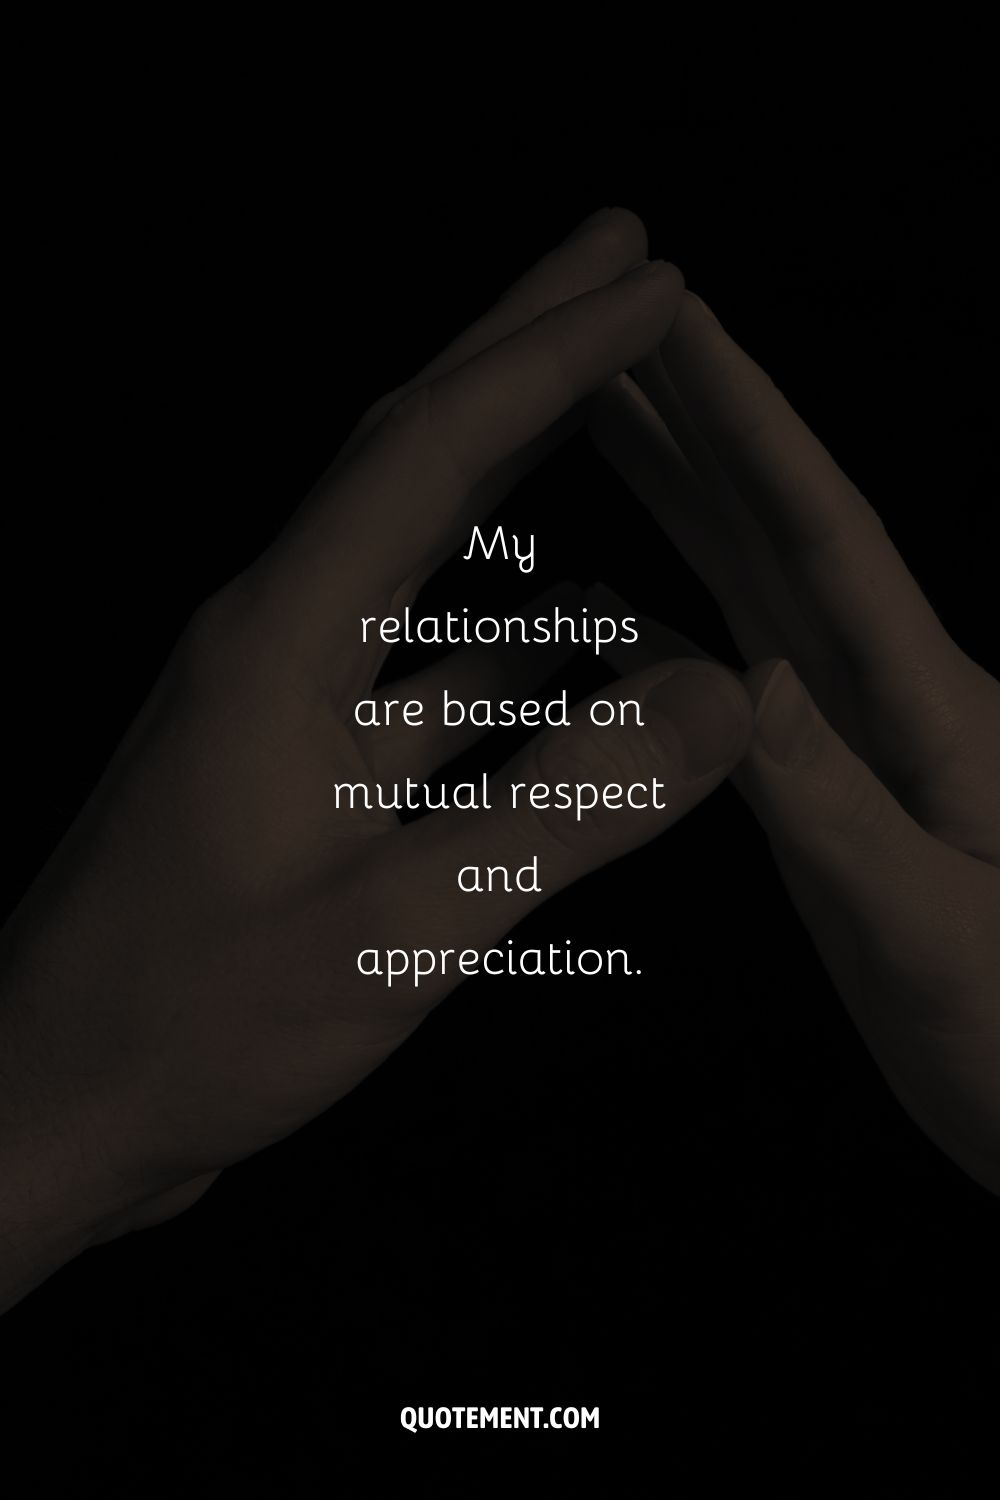 dark photograph of two hands representing an affirmation for relationships
